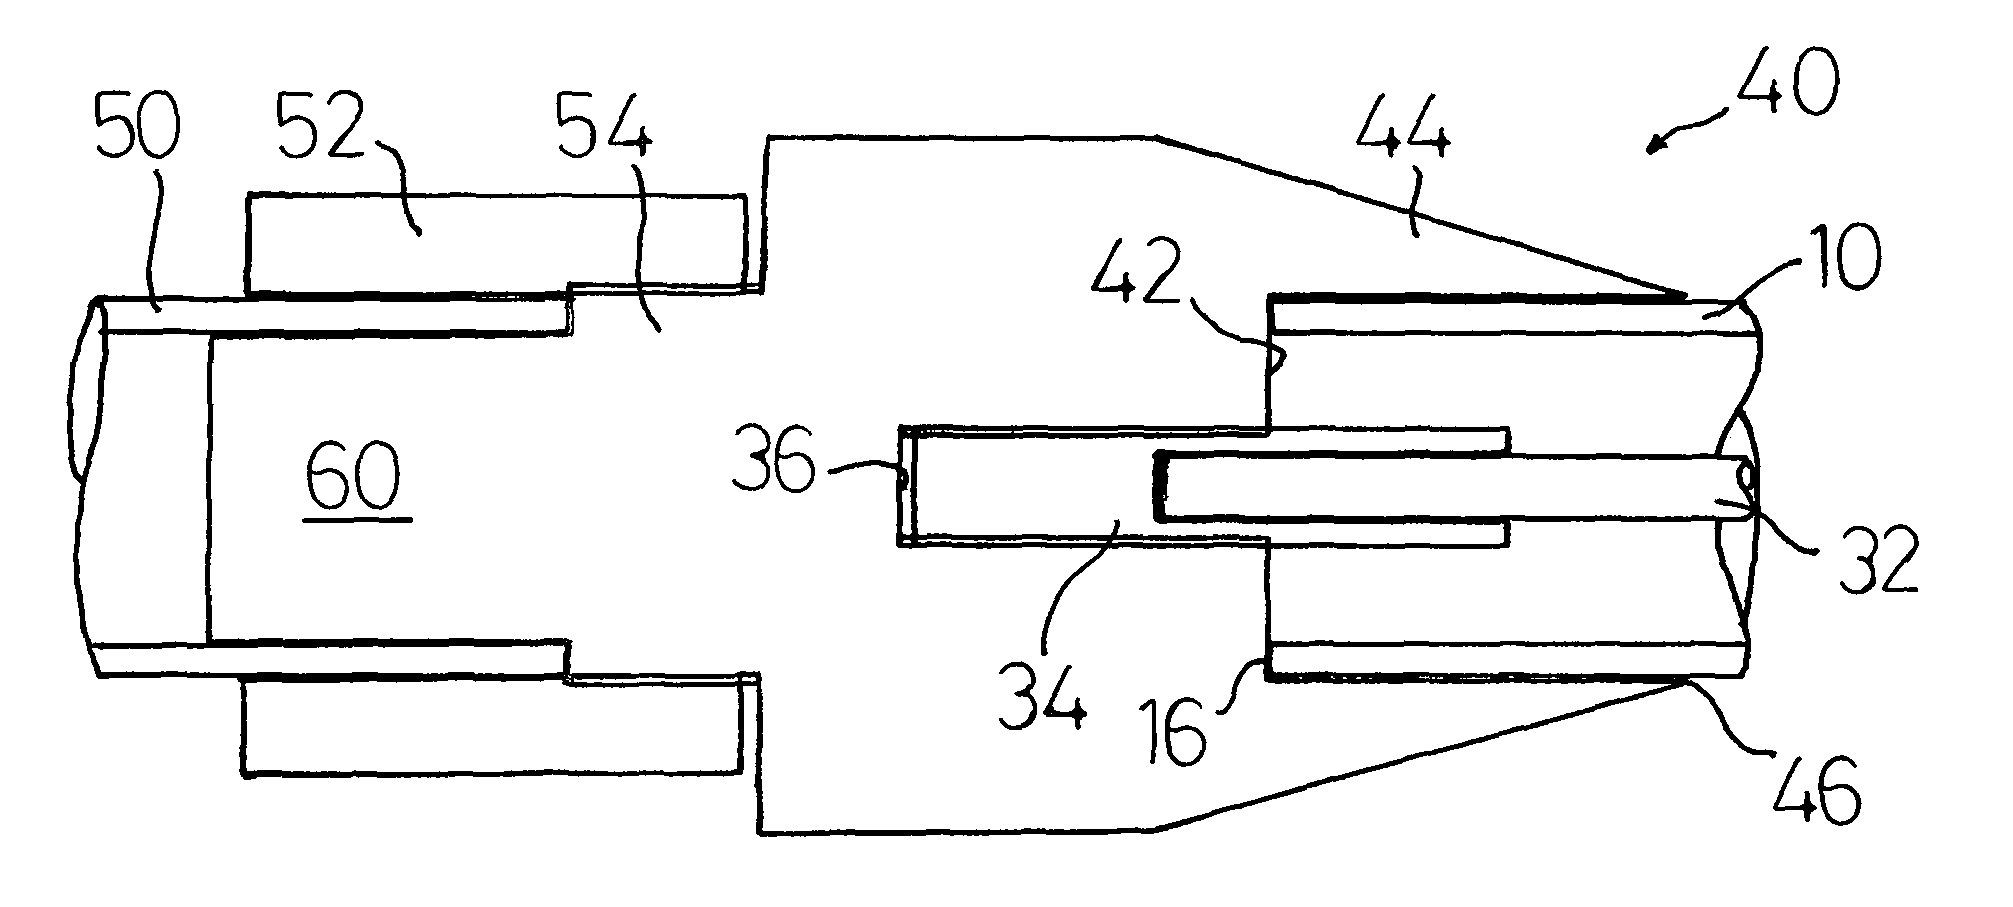 Method for replacing pipes, and apparatus therefor